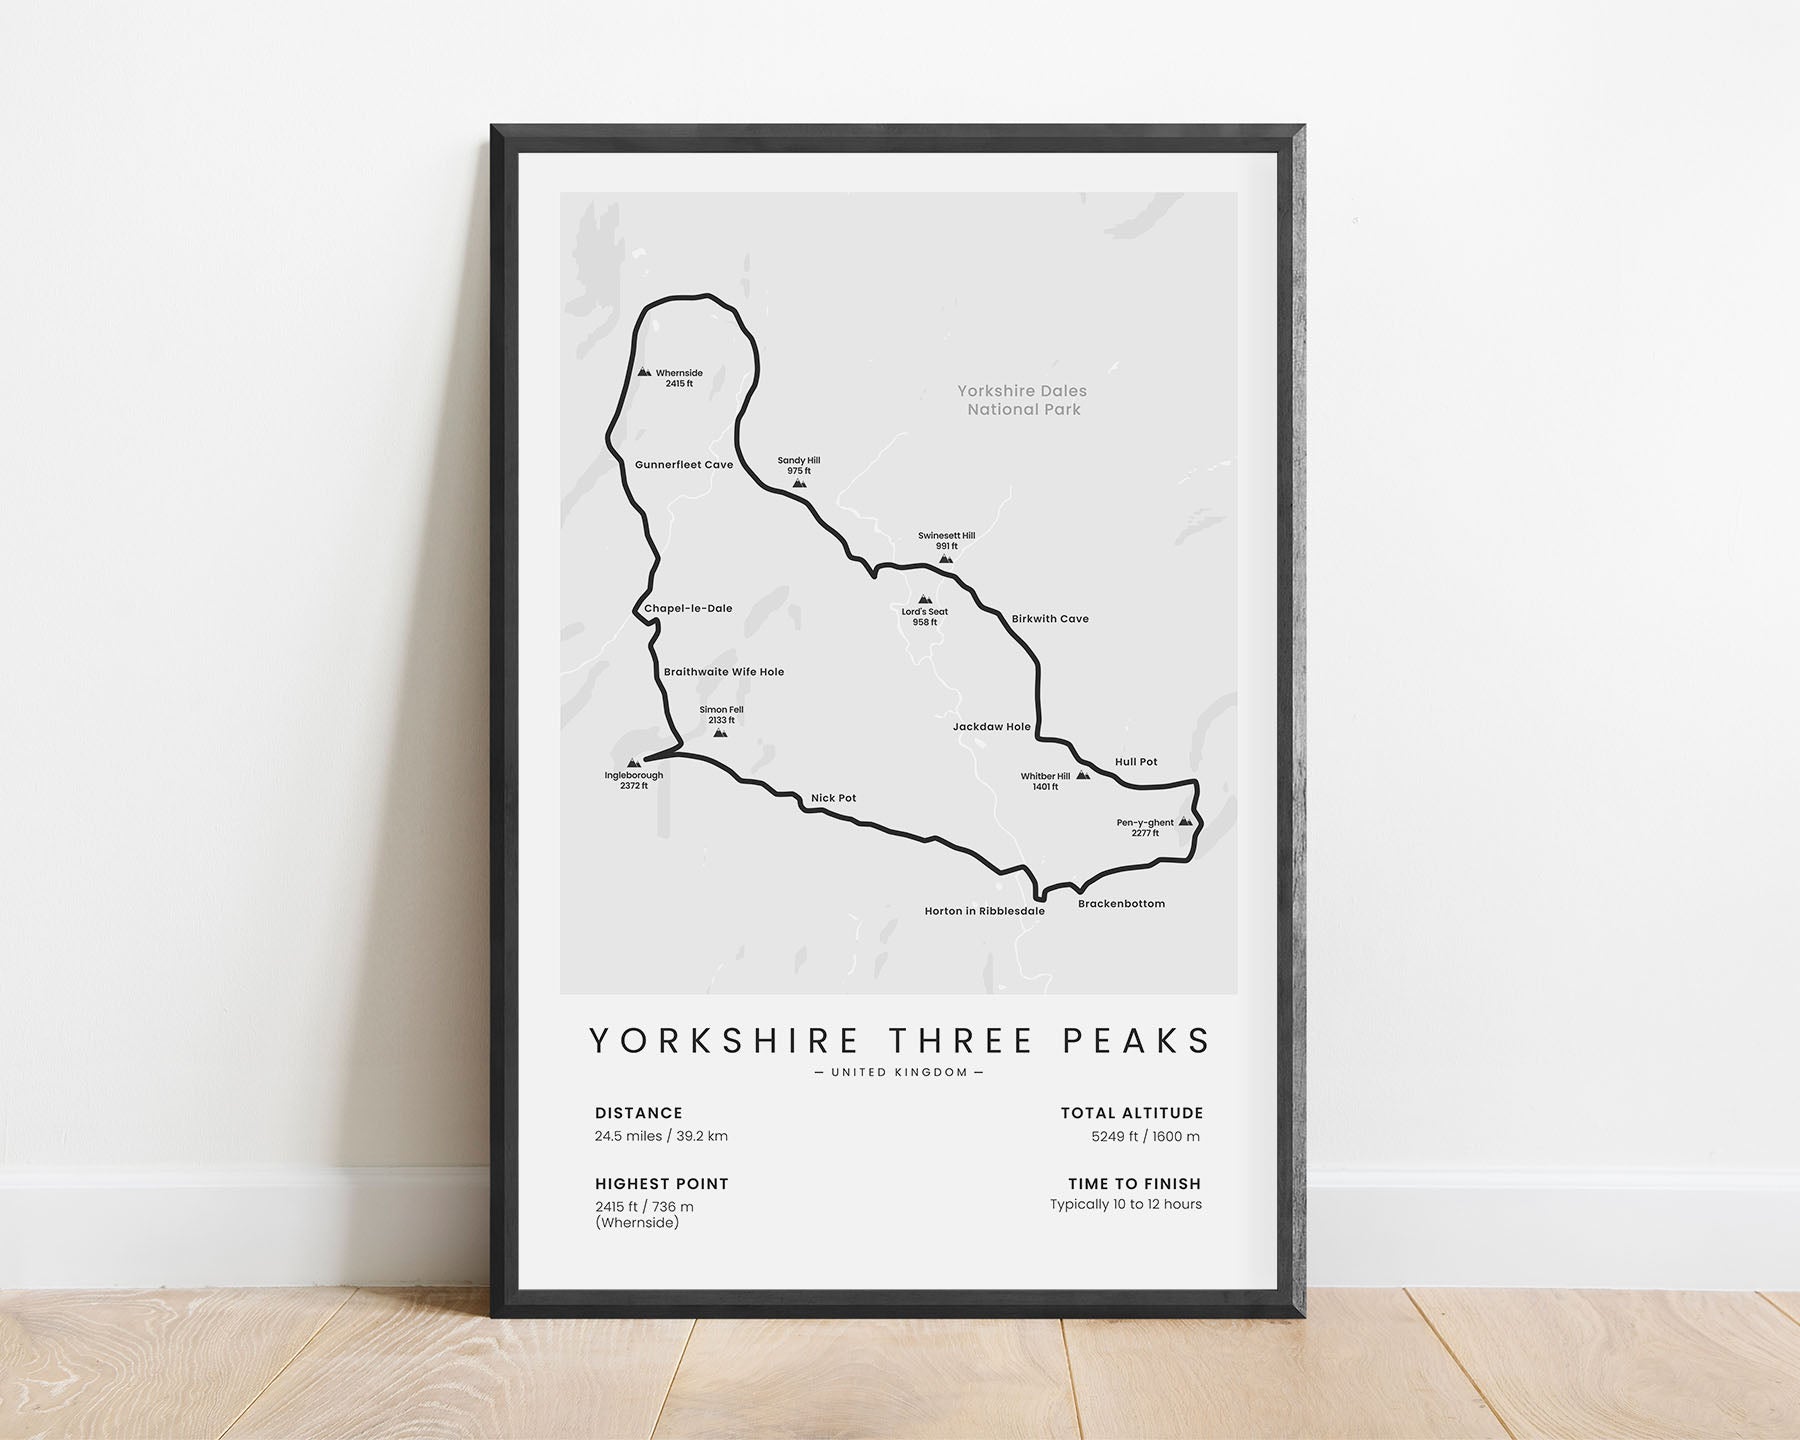 Yorkshire Three Peaks (Whernside) hike route poster with white background